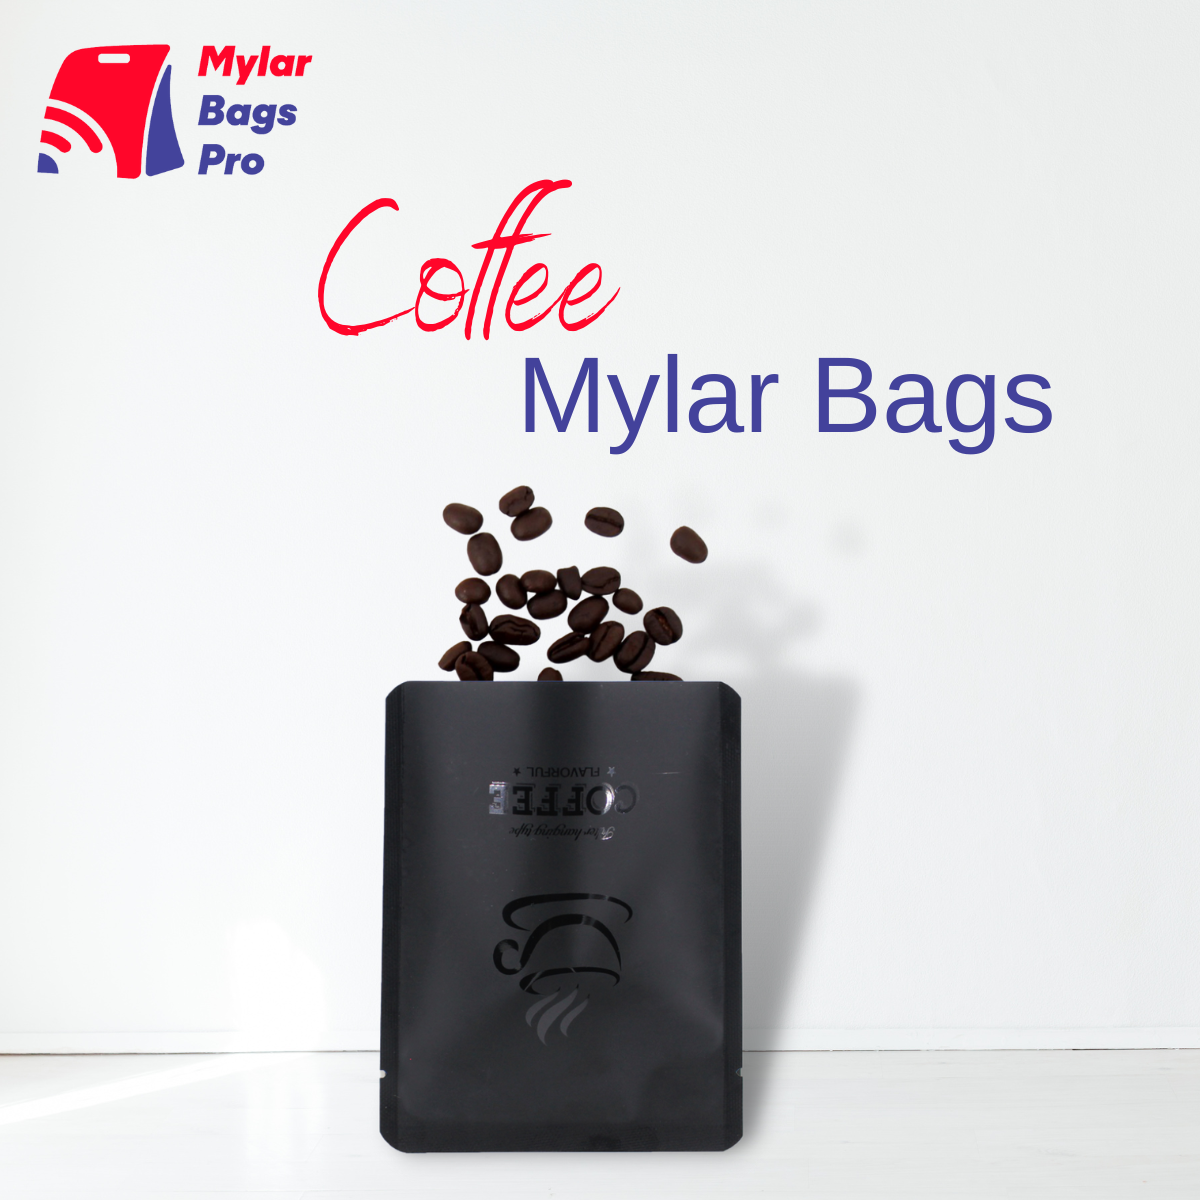 Bring Innovation to Coffee Mylar Bags with Excellent Printing